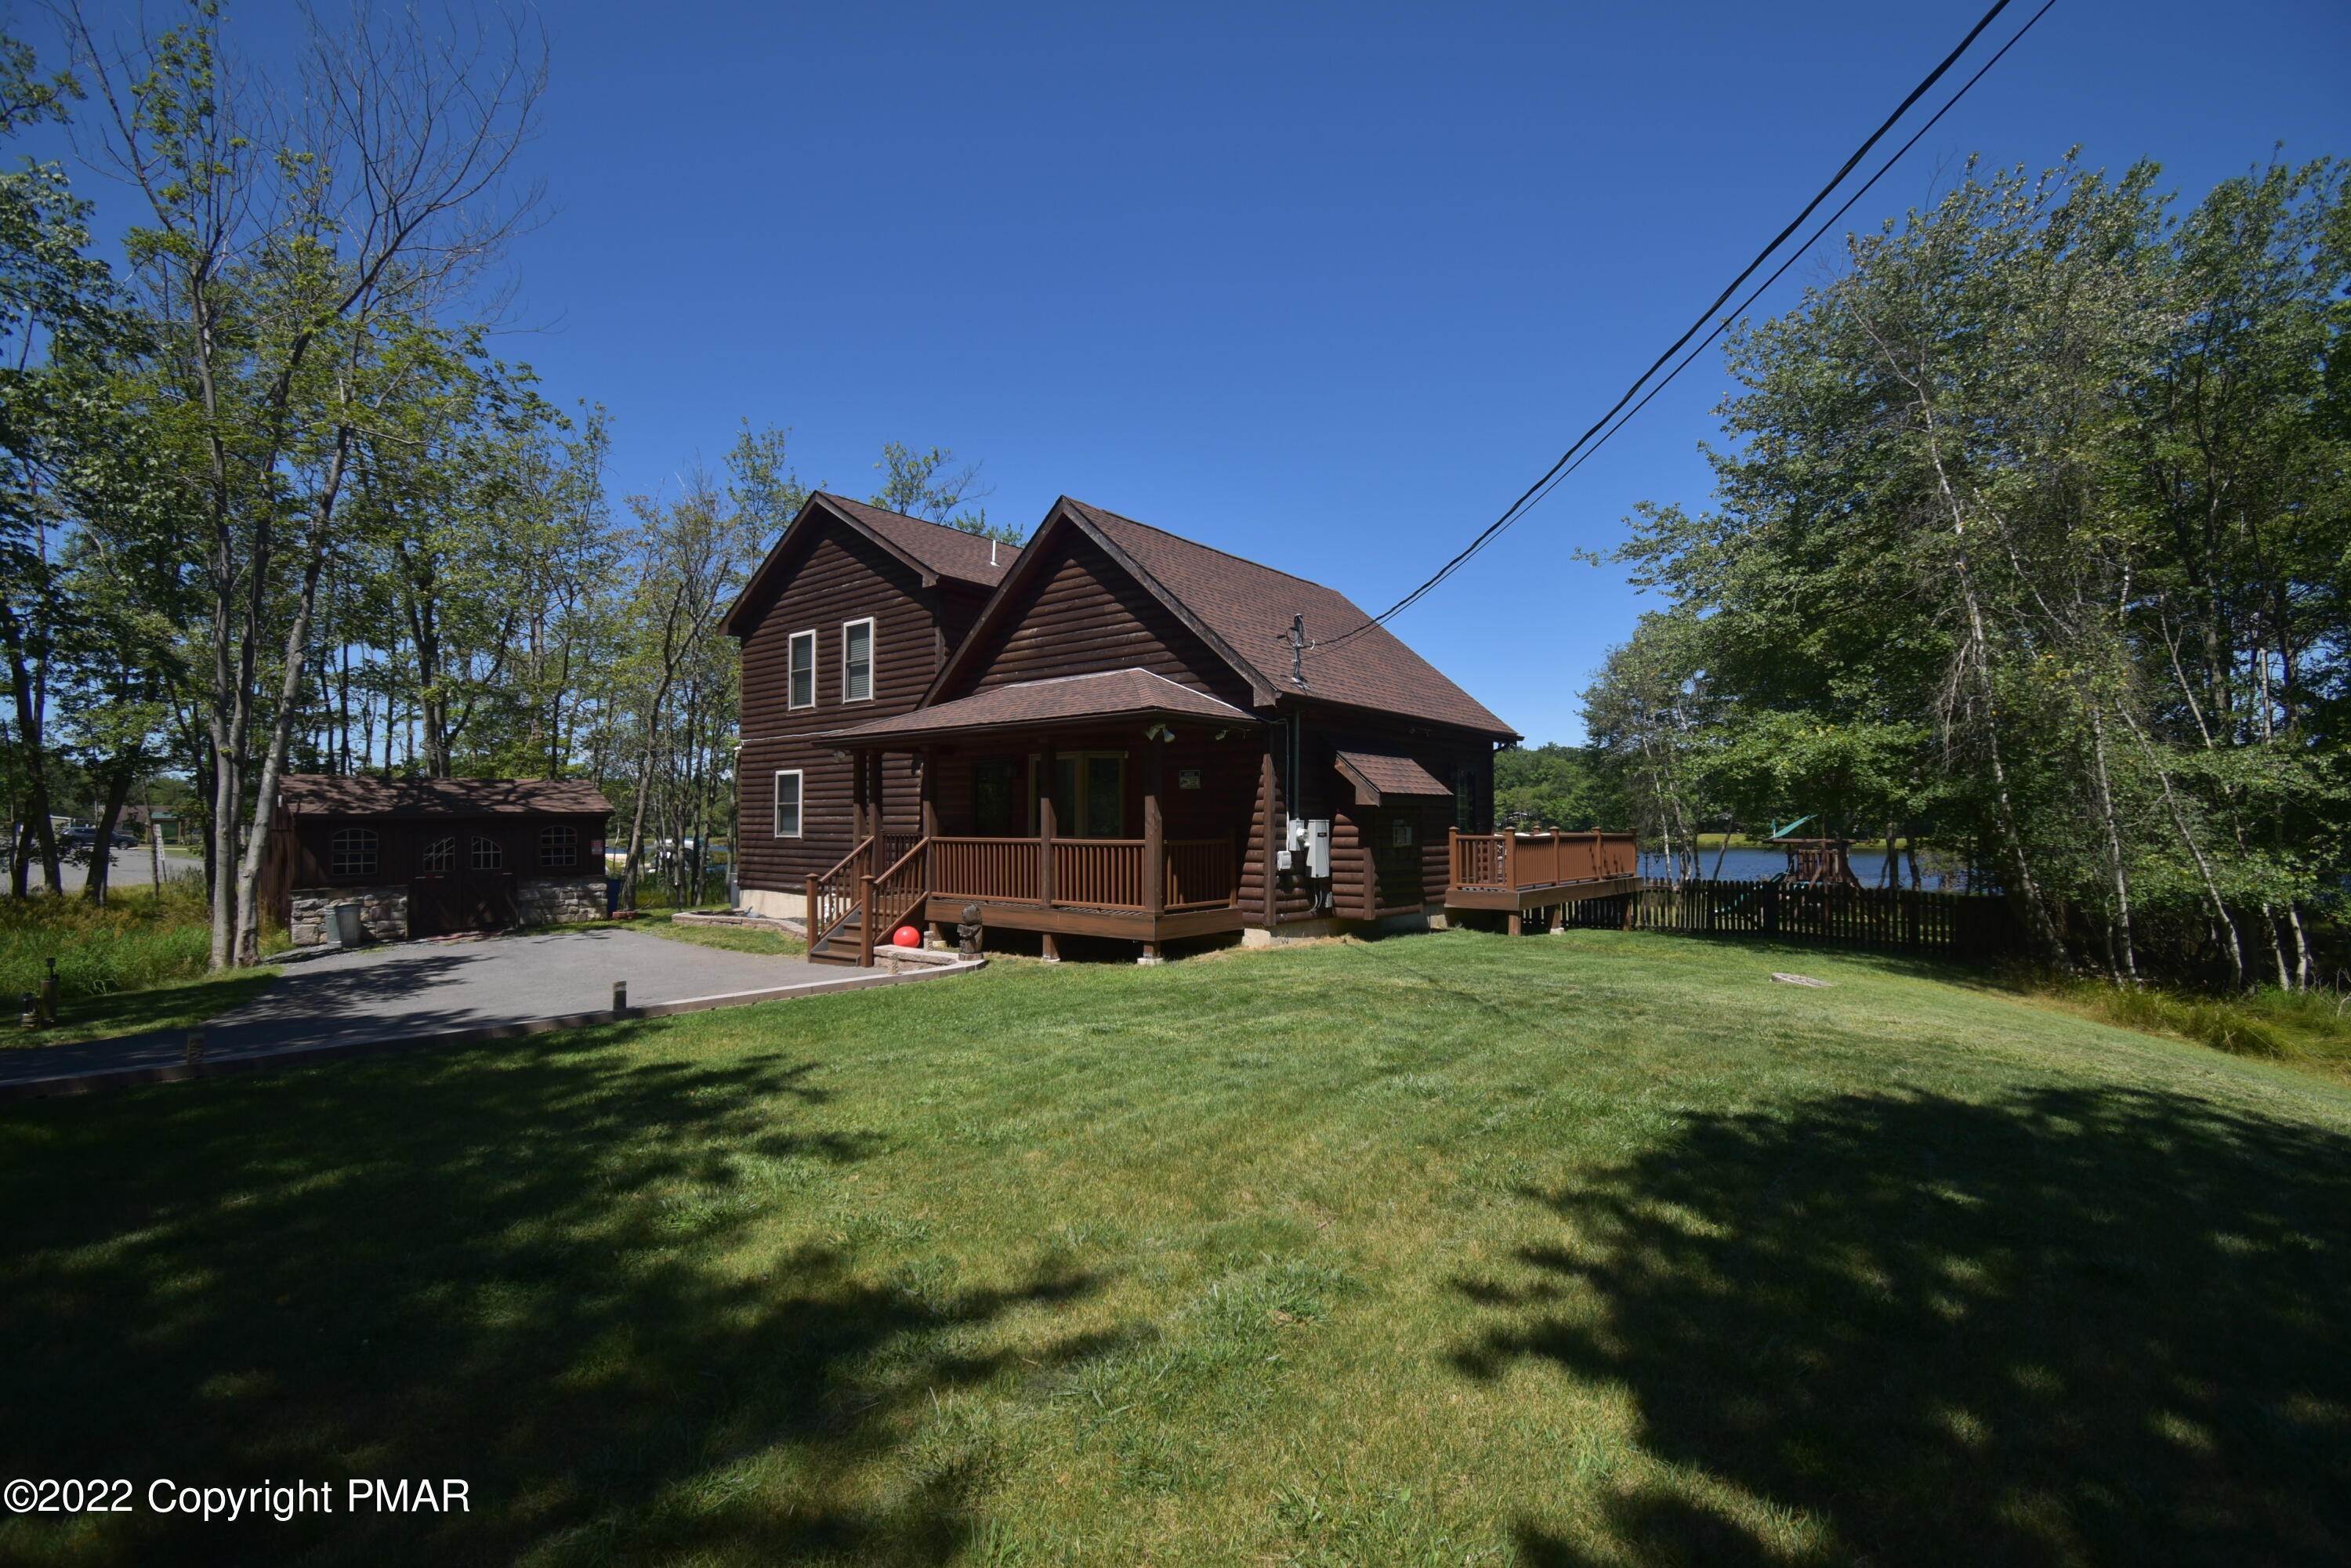 37. Single Family Homes for Sale at 123 Highridge Rd Albrightsville, Pennsylvania 18210 United States